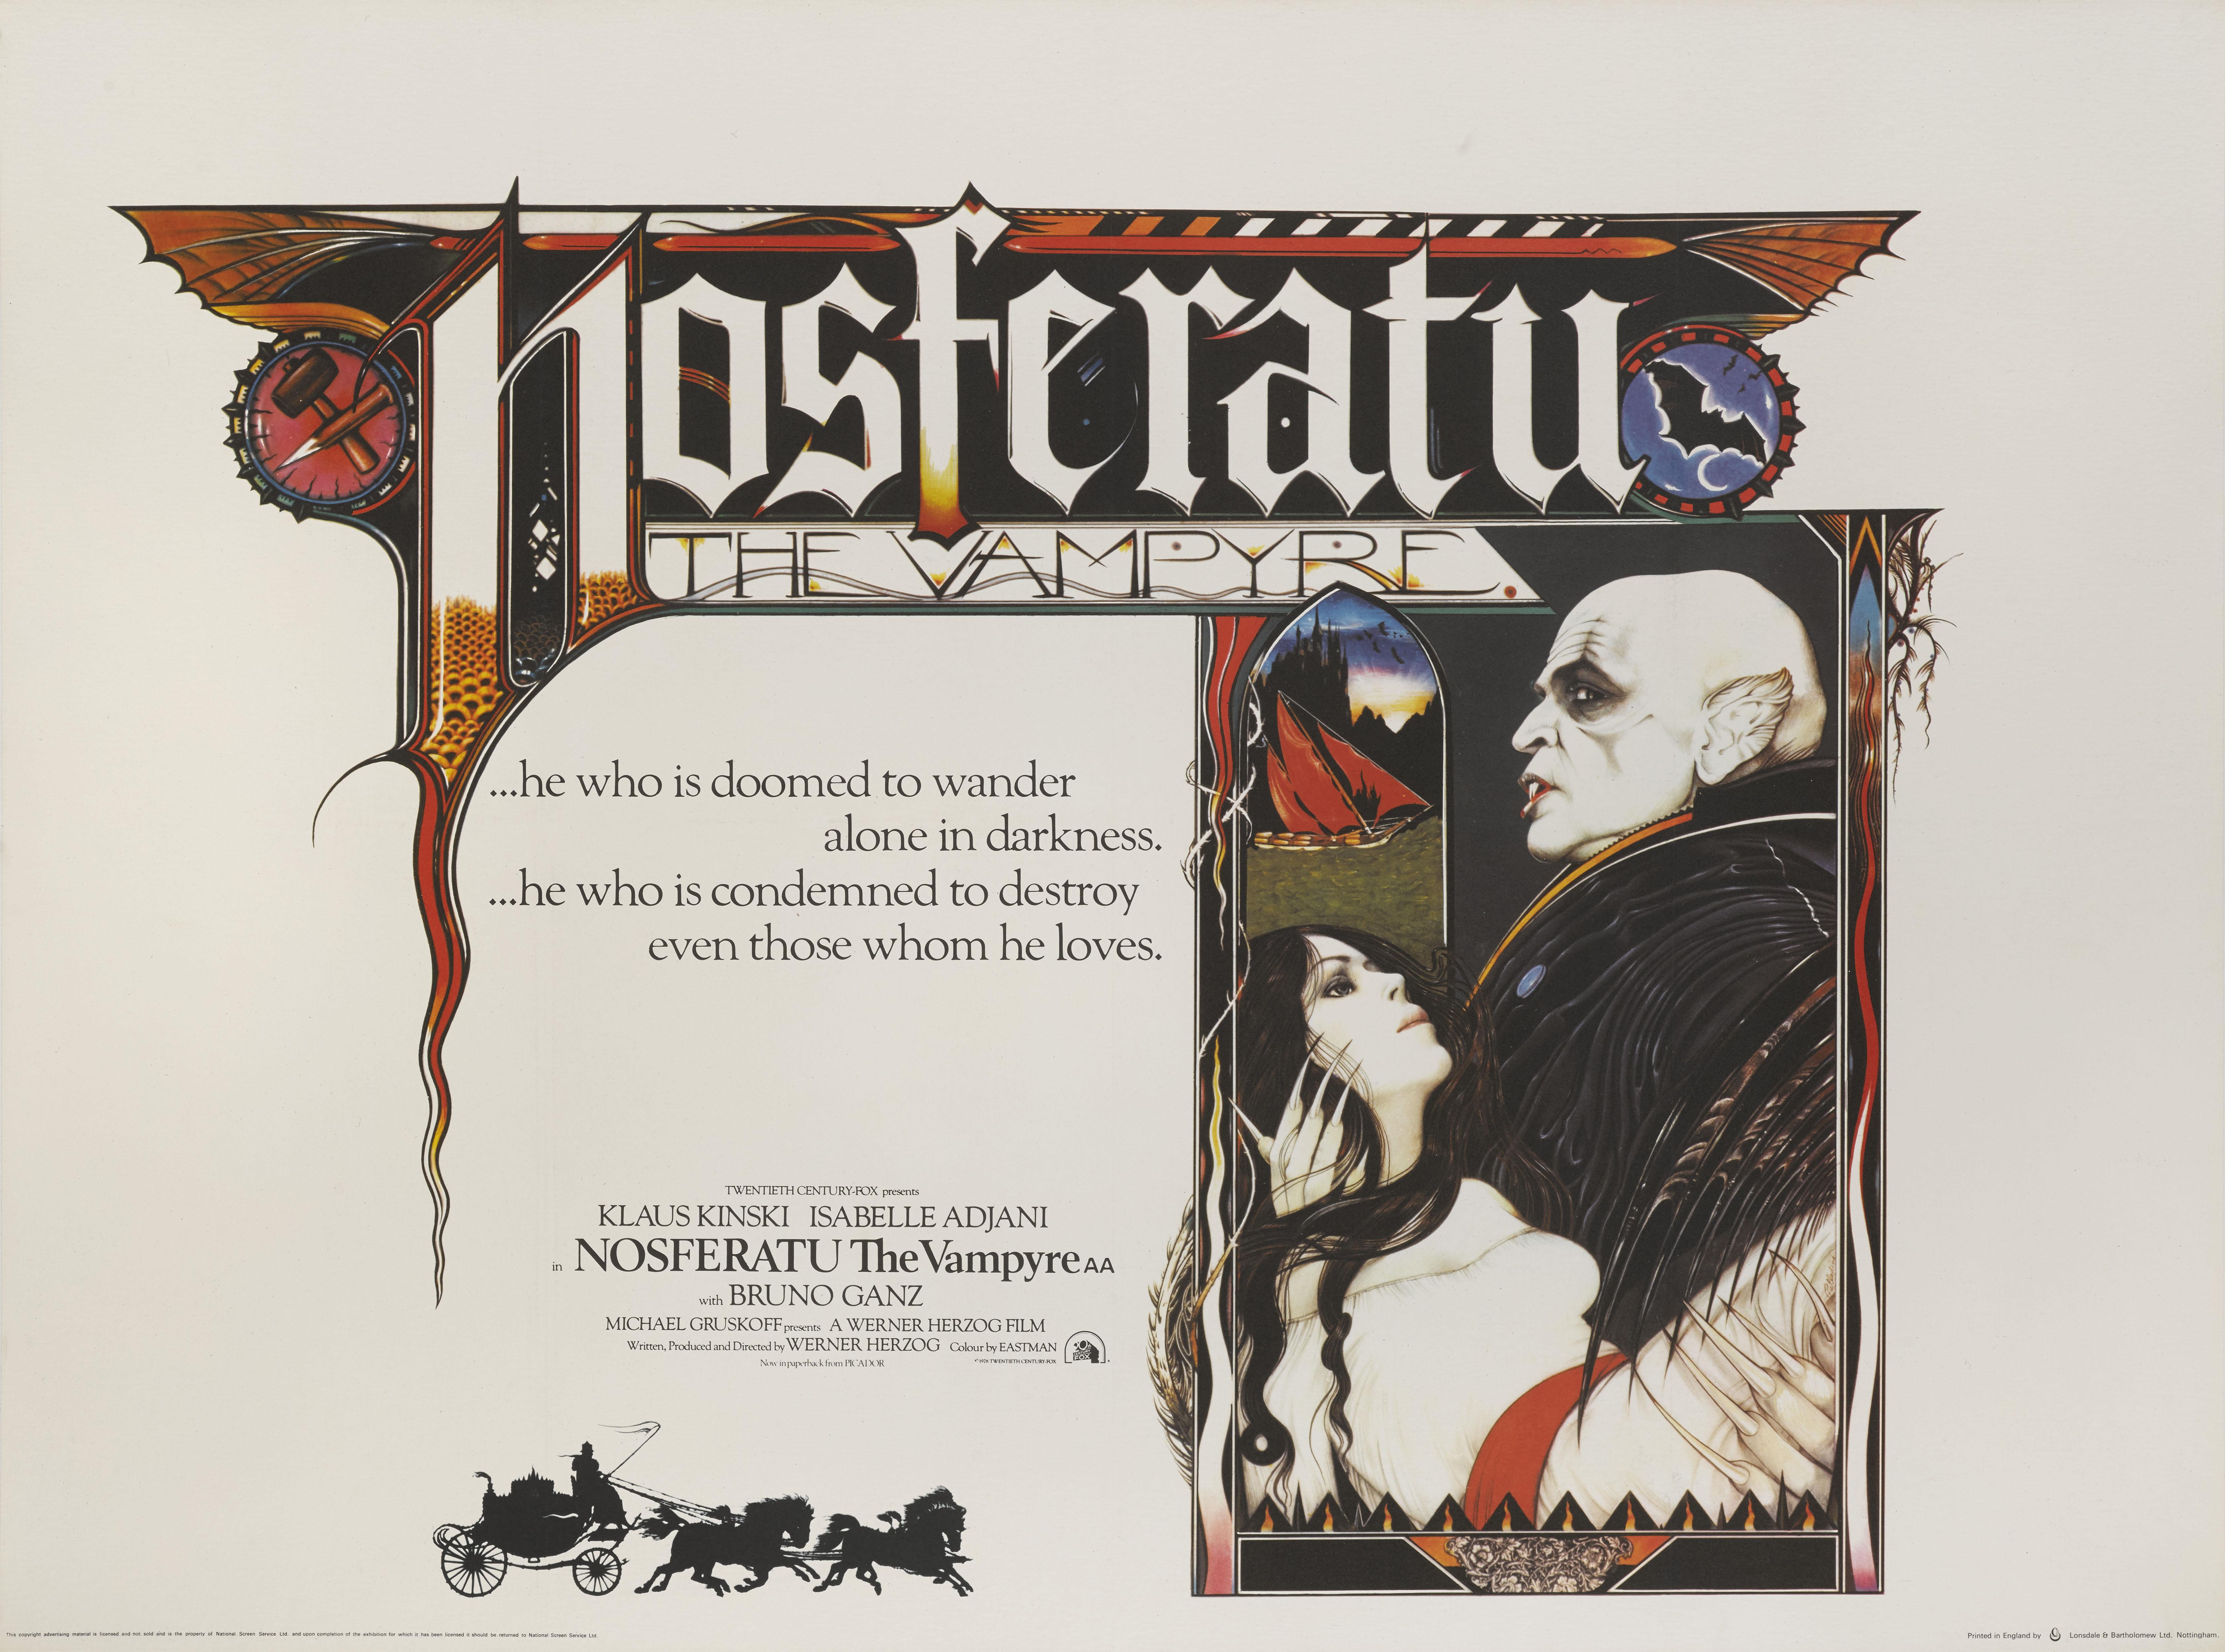 Original British film poster for the 1973 horror film Nosferatu the Vampyre. This film was directed by Werner Herzog and starred Klaus Kinski, Isabelle Adjani and Bruno Ganz. The artwork is by the American illustrator David Palladini (b.